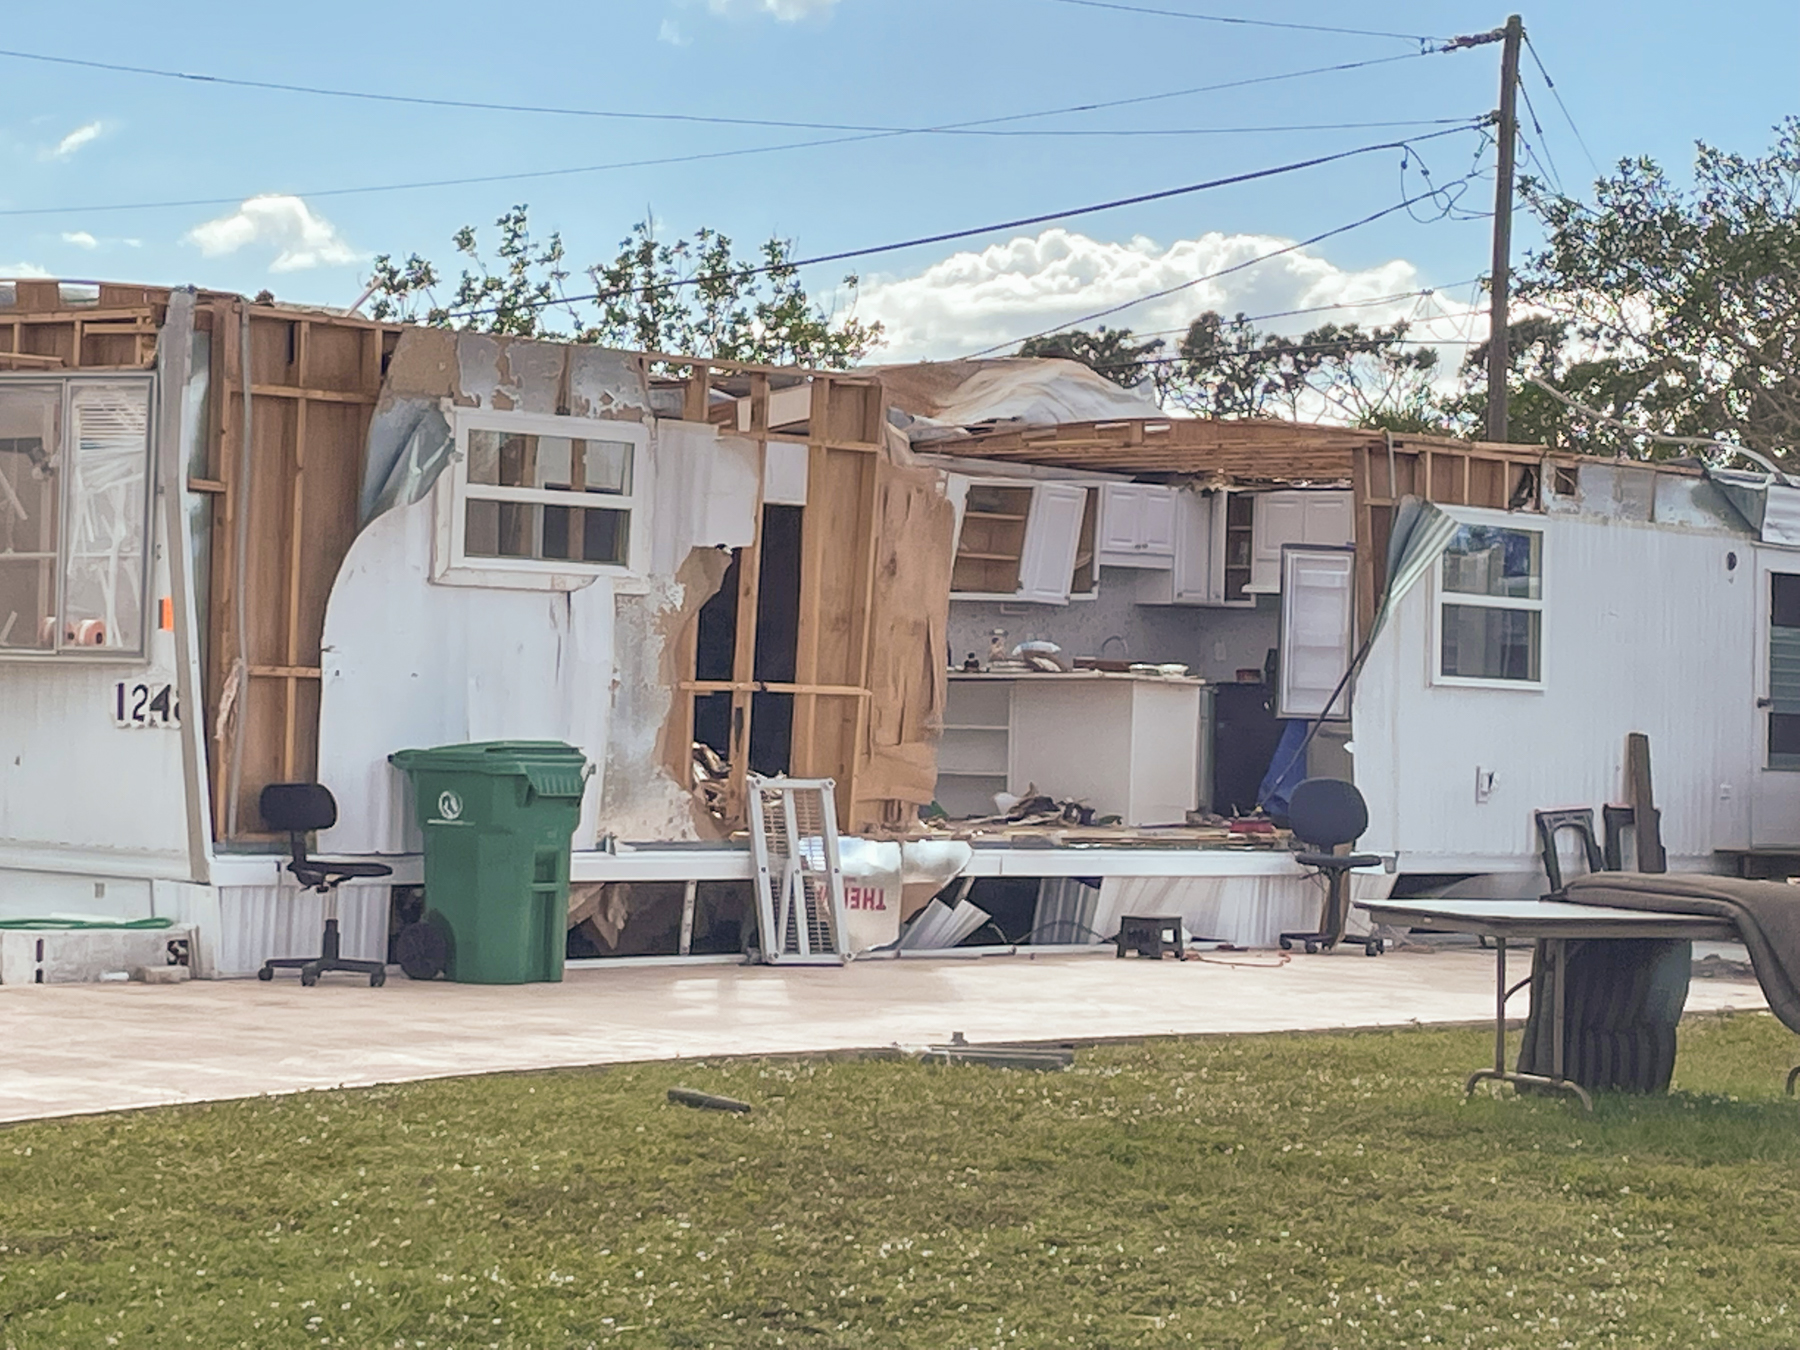 A modular home with the front torn off.